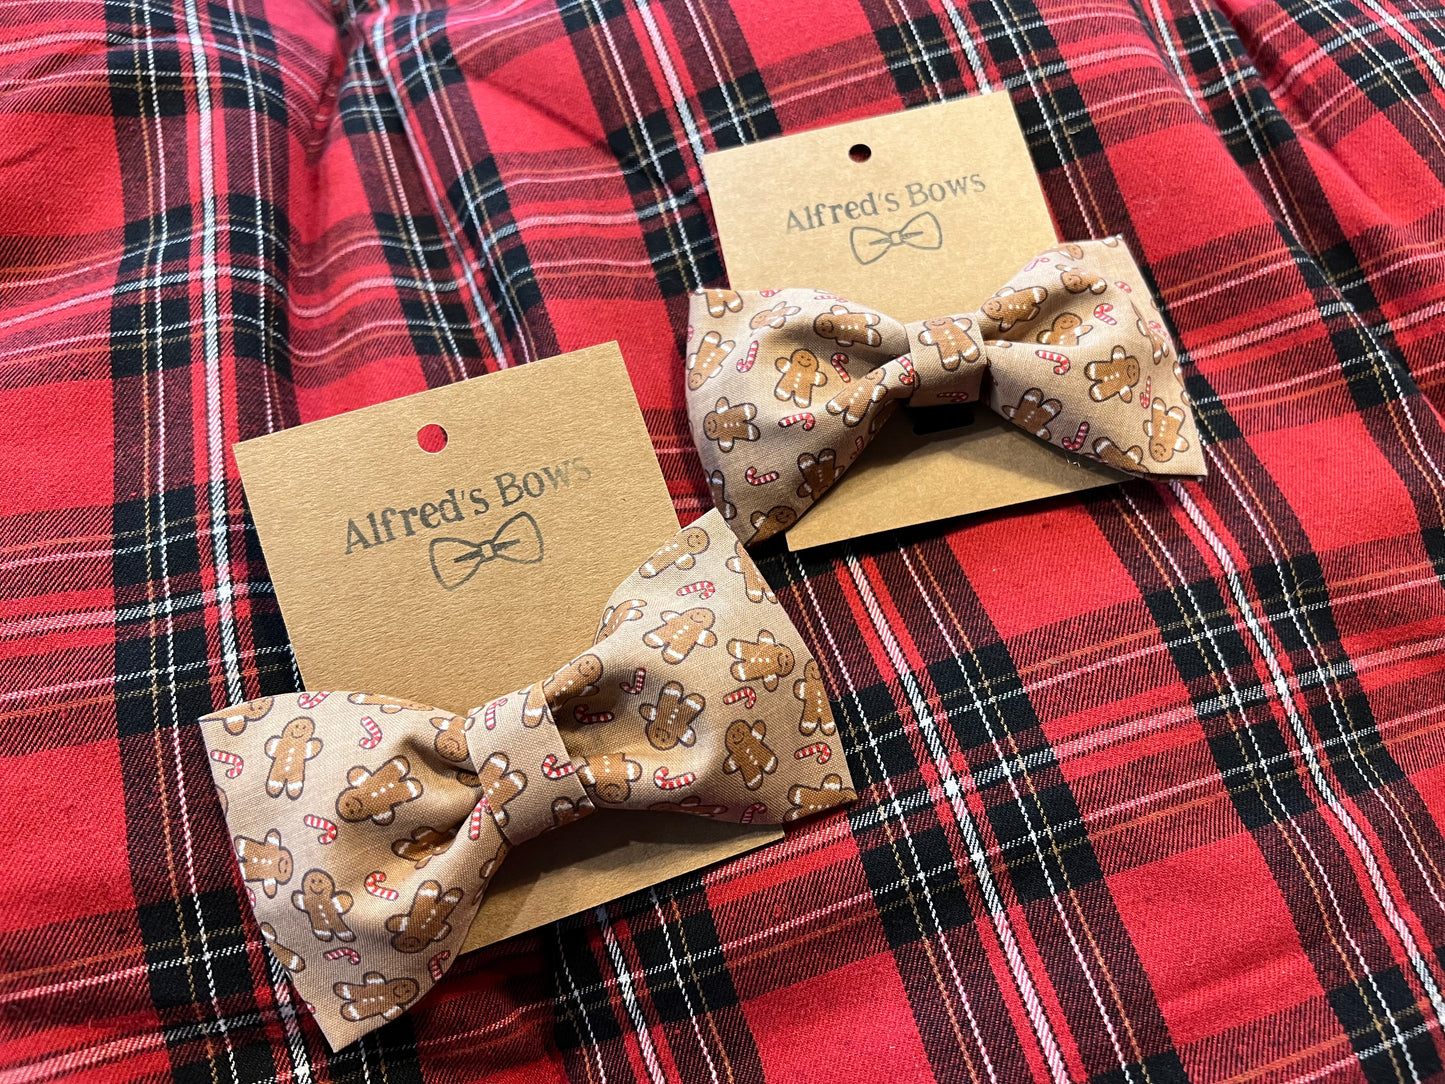 Alfred's Bows "Gingerbread" Medium Bow